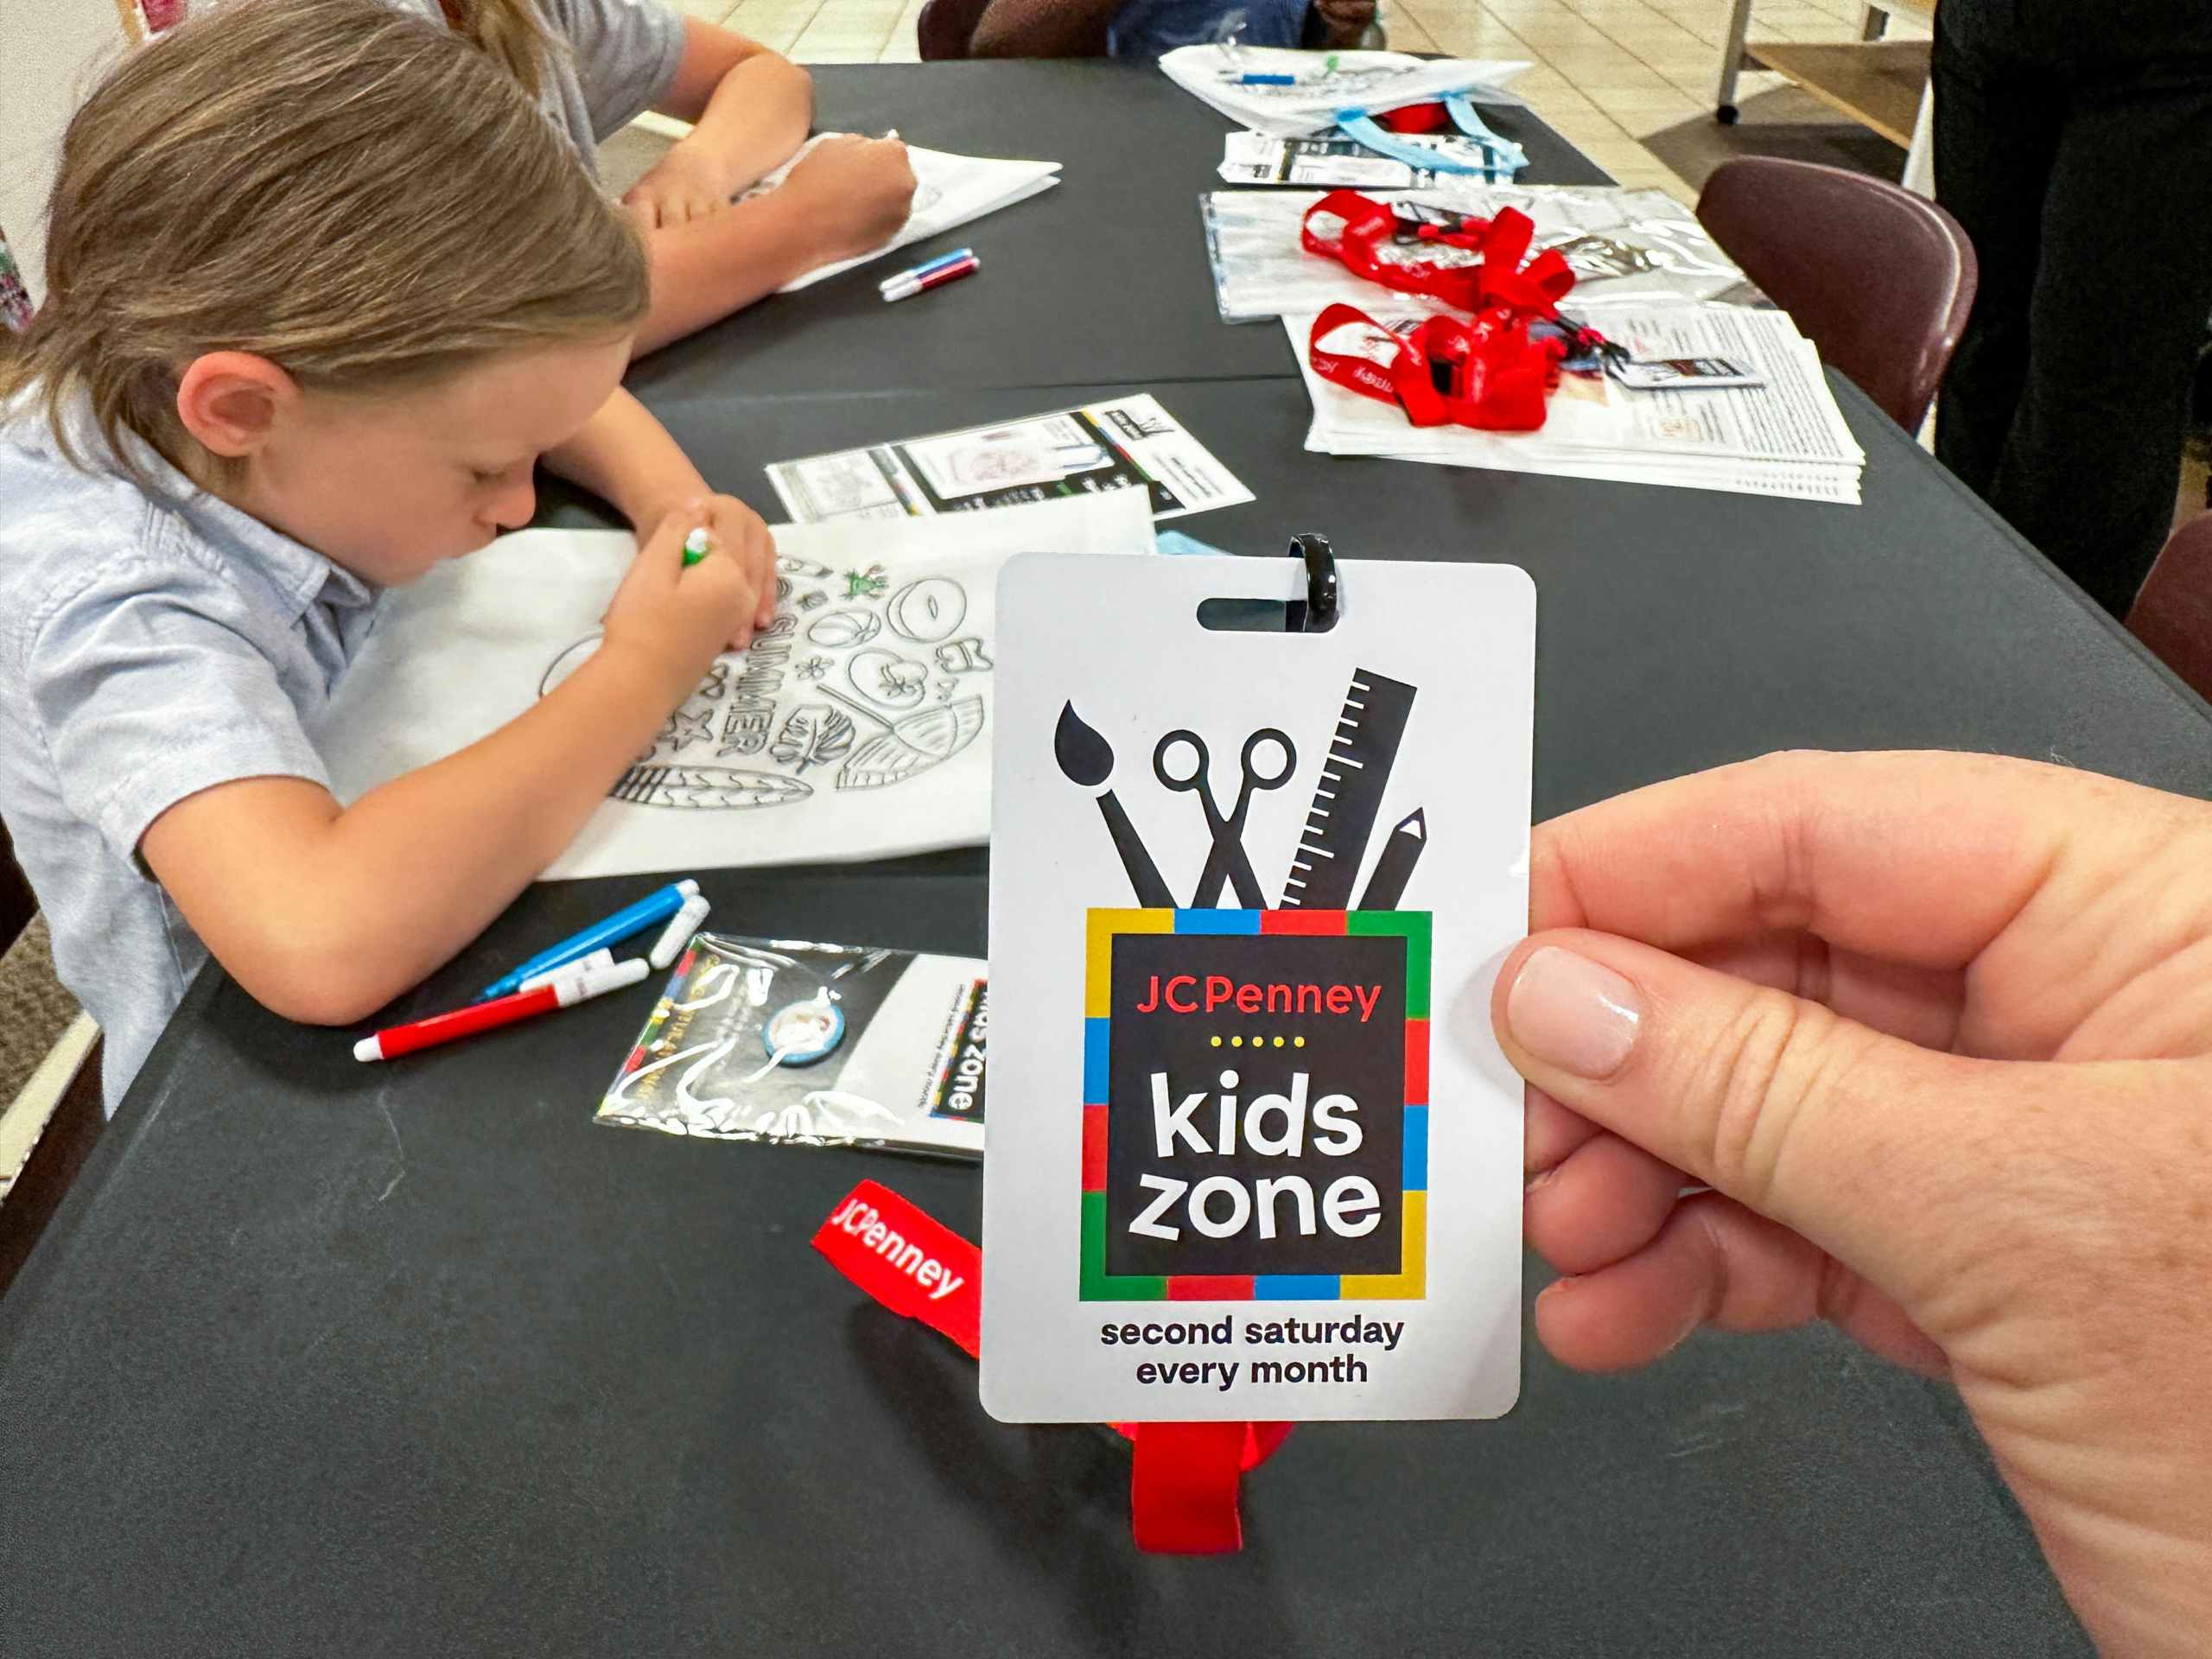 jcp-jcpenney-kids-zone-free-crafts-kcl-model-9